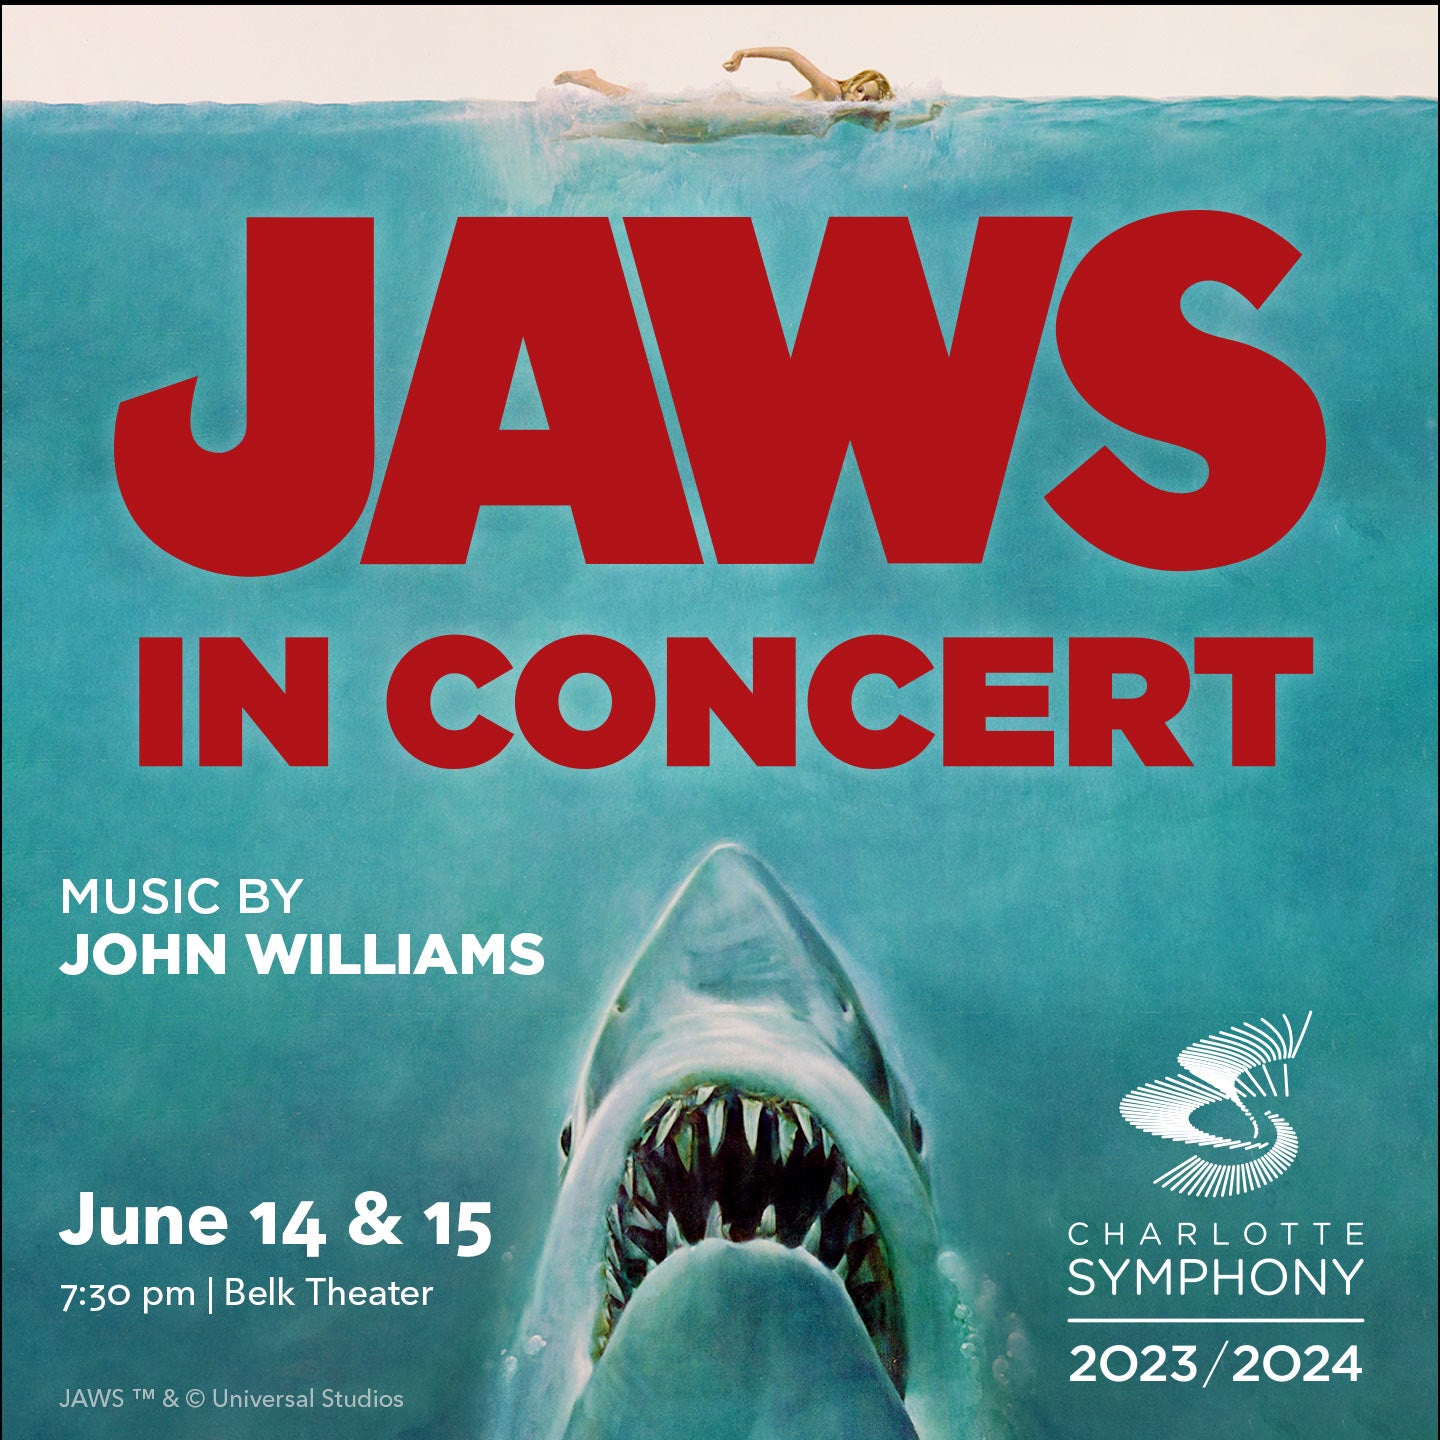 Charlotte Symphony: Jaws in Concert